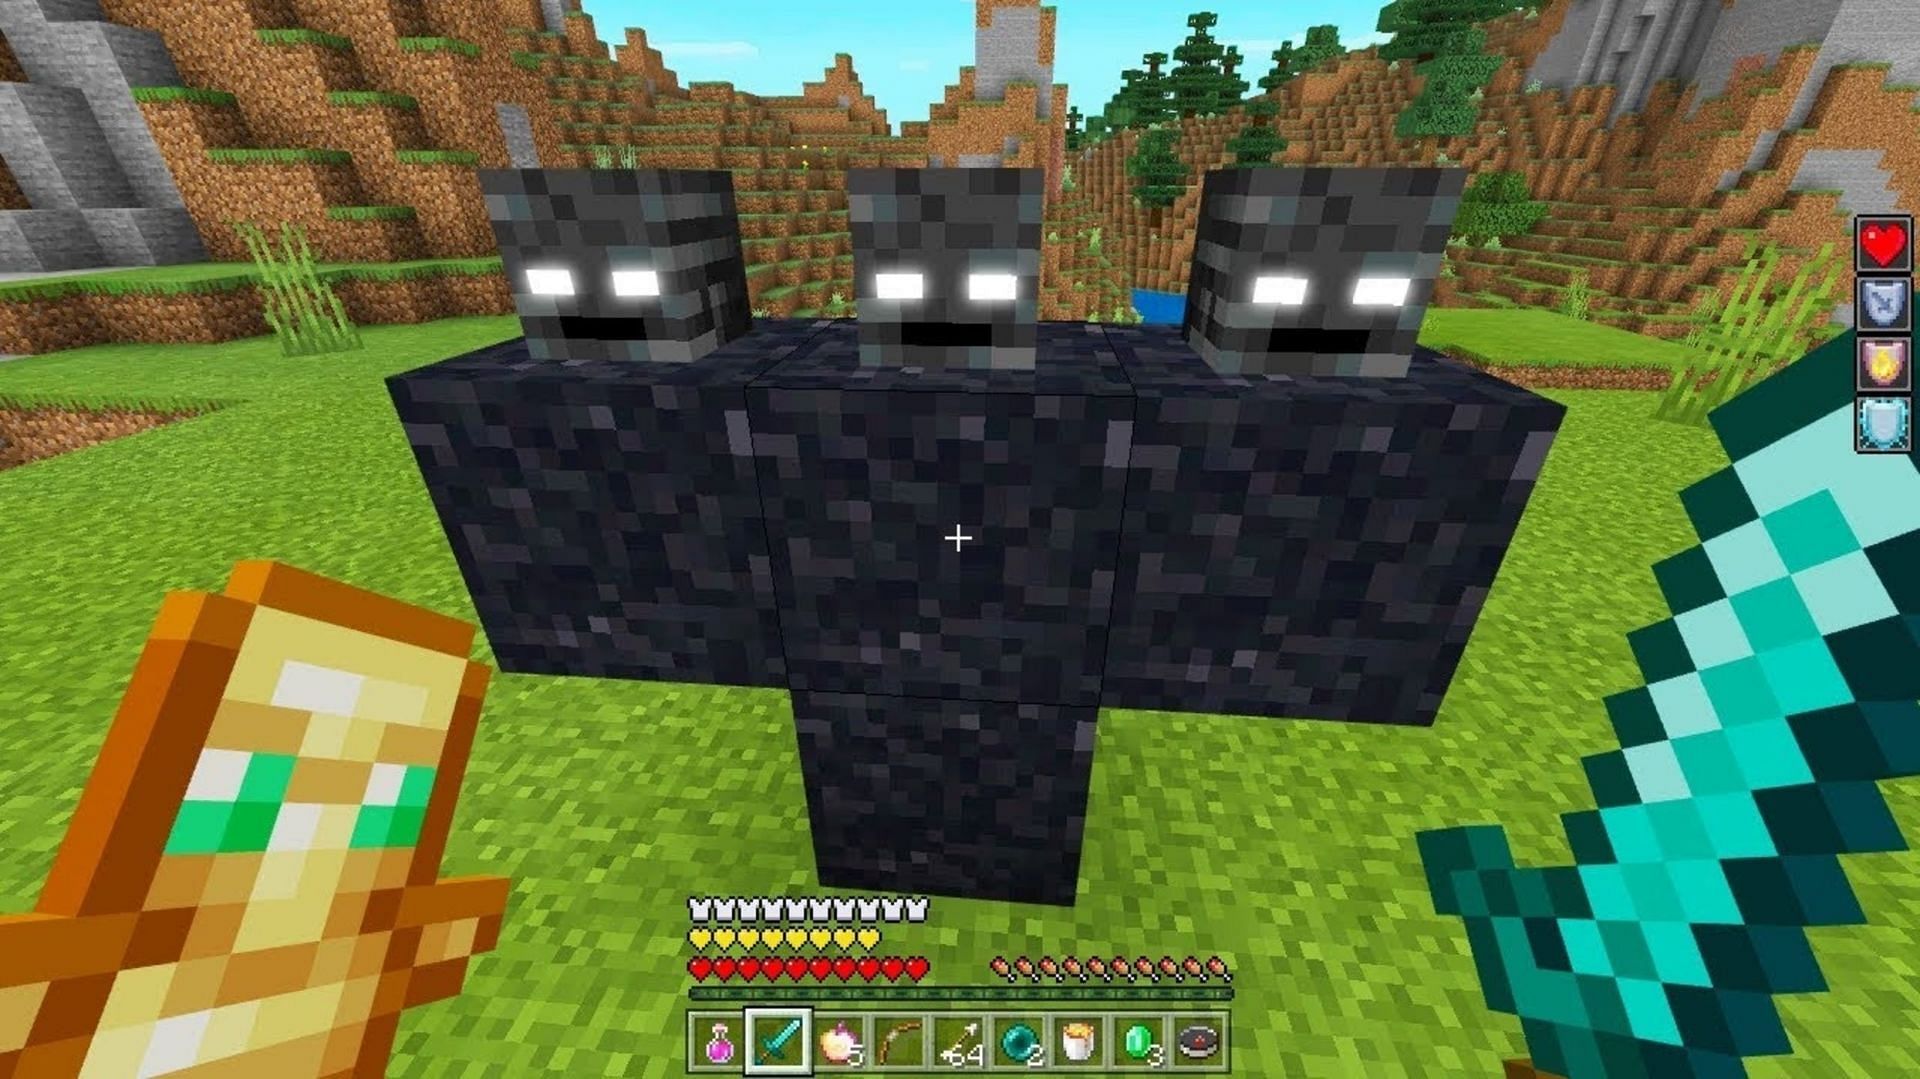 A player with a Totem of Undying attempting to summon the Wither (Image via Glowific/Youtube)